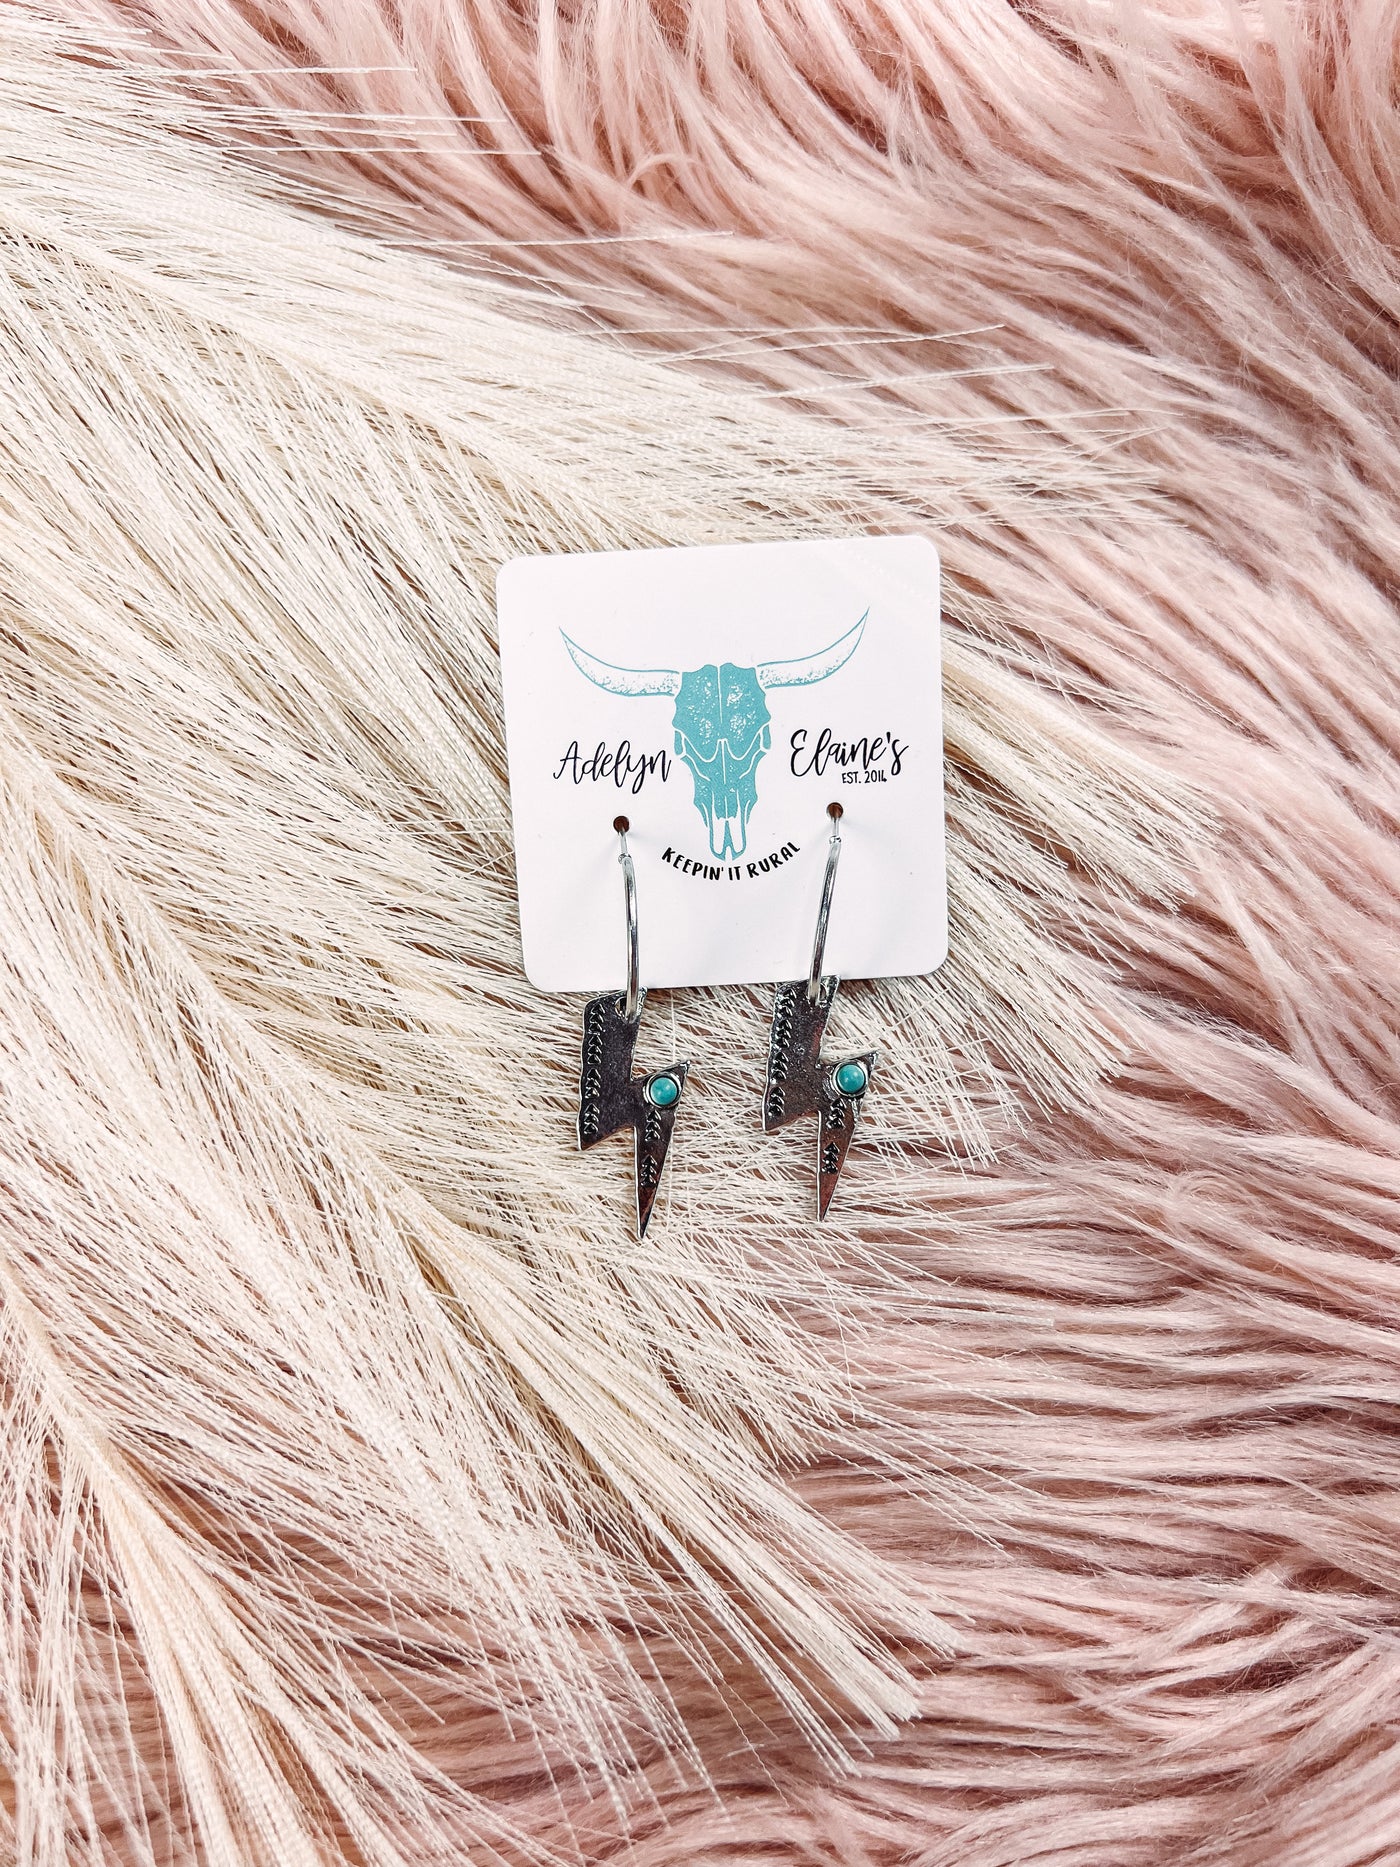 Stamped Bolt Earrings-202 JEWELRY-Adelyn Elaine's-Adelyn Elaine's Boutique, Women's Clothing Boutique in Gilmer, TX